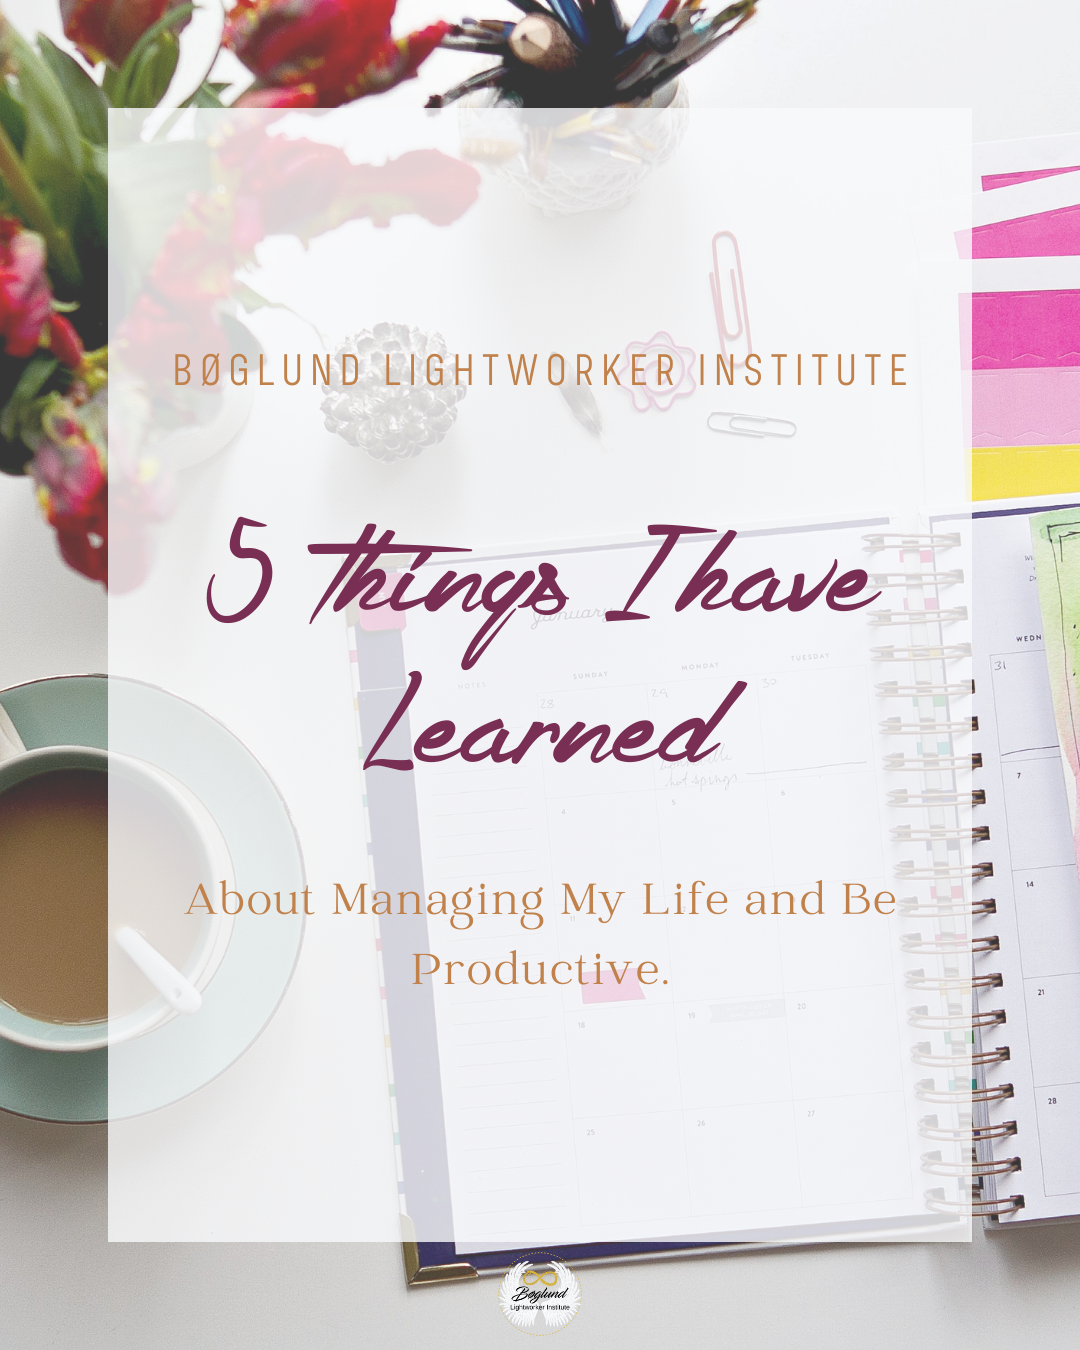 5 Things I have Learned About Managing My Life and Be Productive.